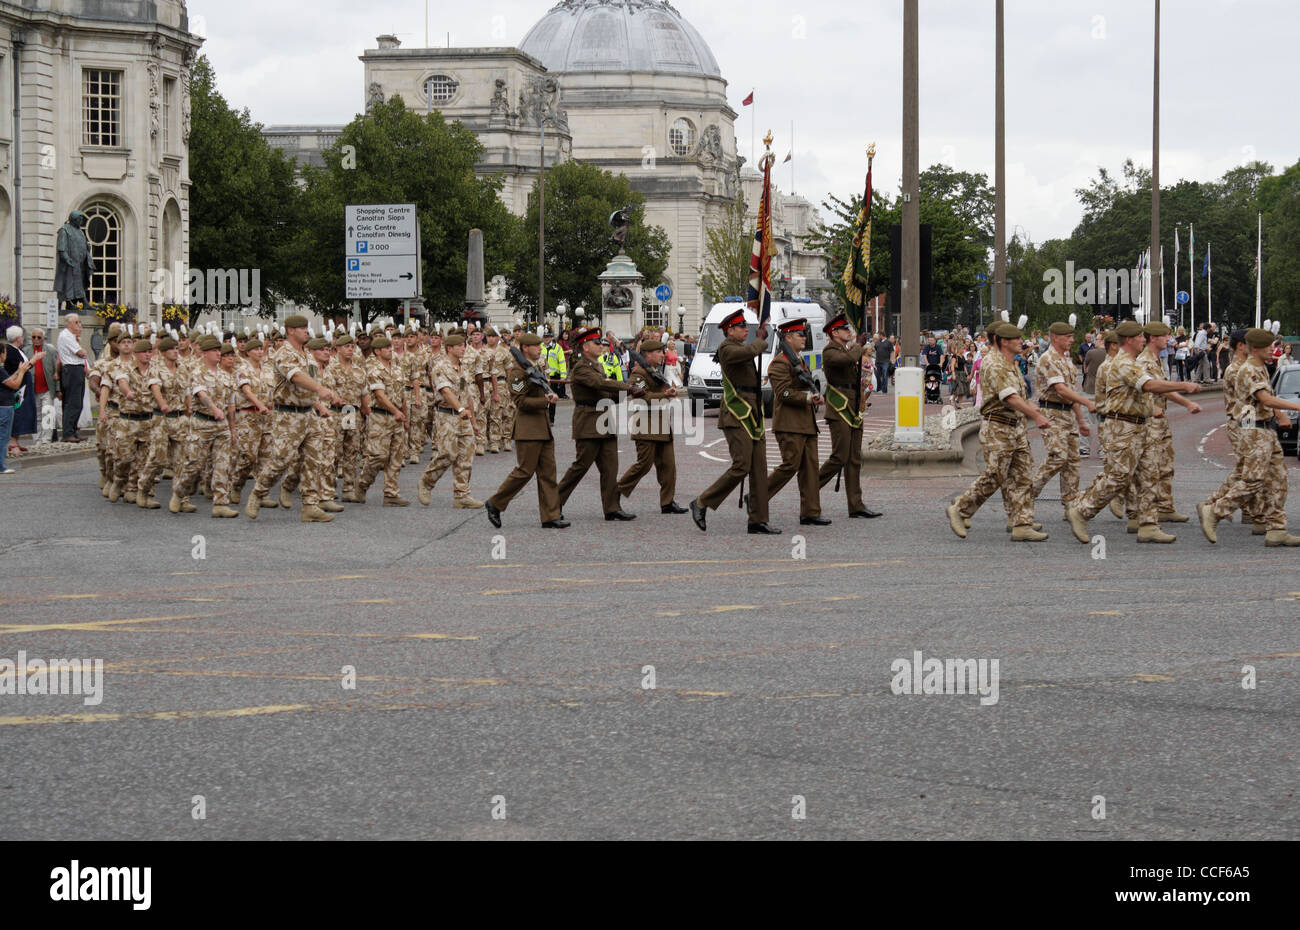 The Royal Welsh regiment parade through the streets of Cardiff Wales return from active duty in August 2009. British Army Military personel Stock Photo